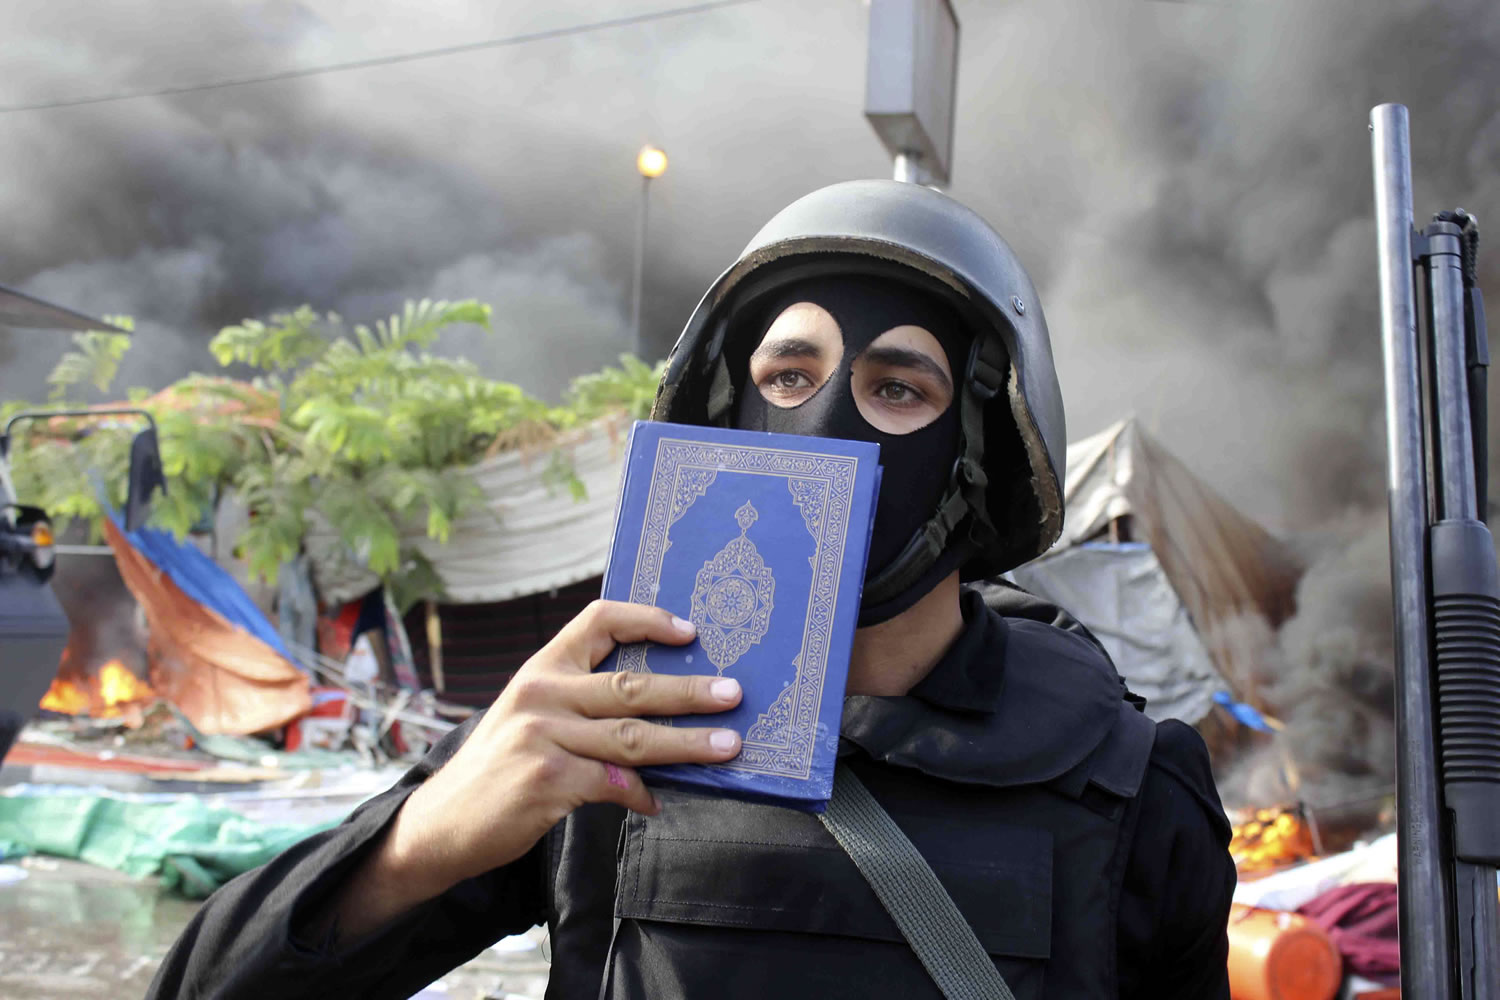 A member of the Egyptian security forces holds up a copy of the Quran as they clear the smaller of the two sit-ins by supporters of ousted Islamist President Mohammed Morsi, near the Cairo University campus in Giza, Cairo, Egypt, on Wednesday.